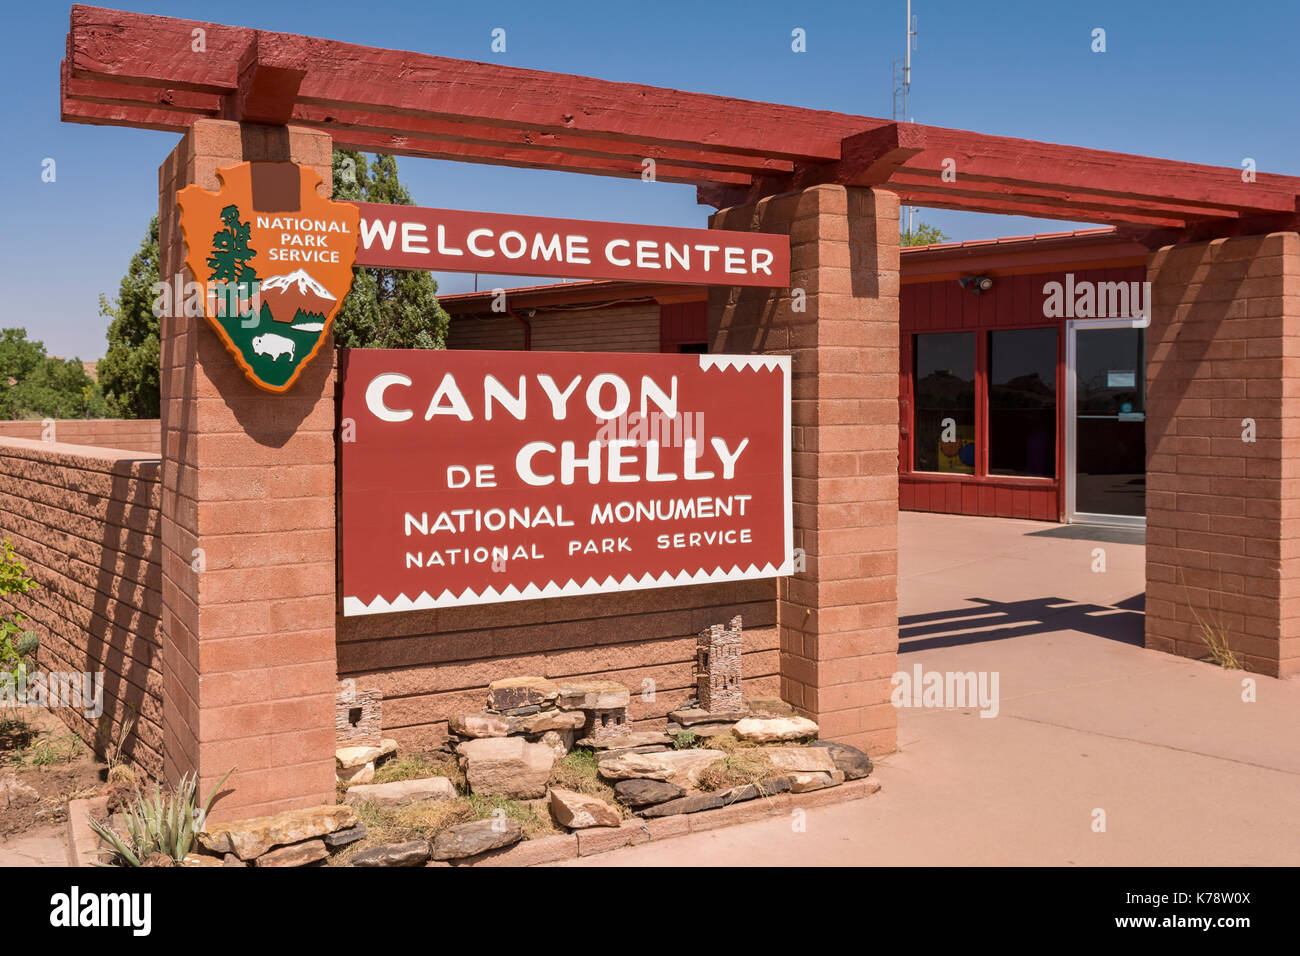 Canyon de Chelly National Monument Welcome Center and sign located on the Navajo Reservation in Arizona, USA Stock Photo